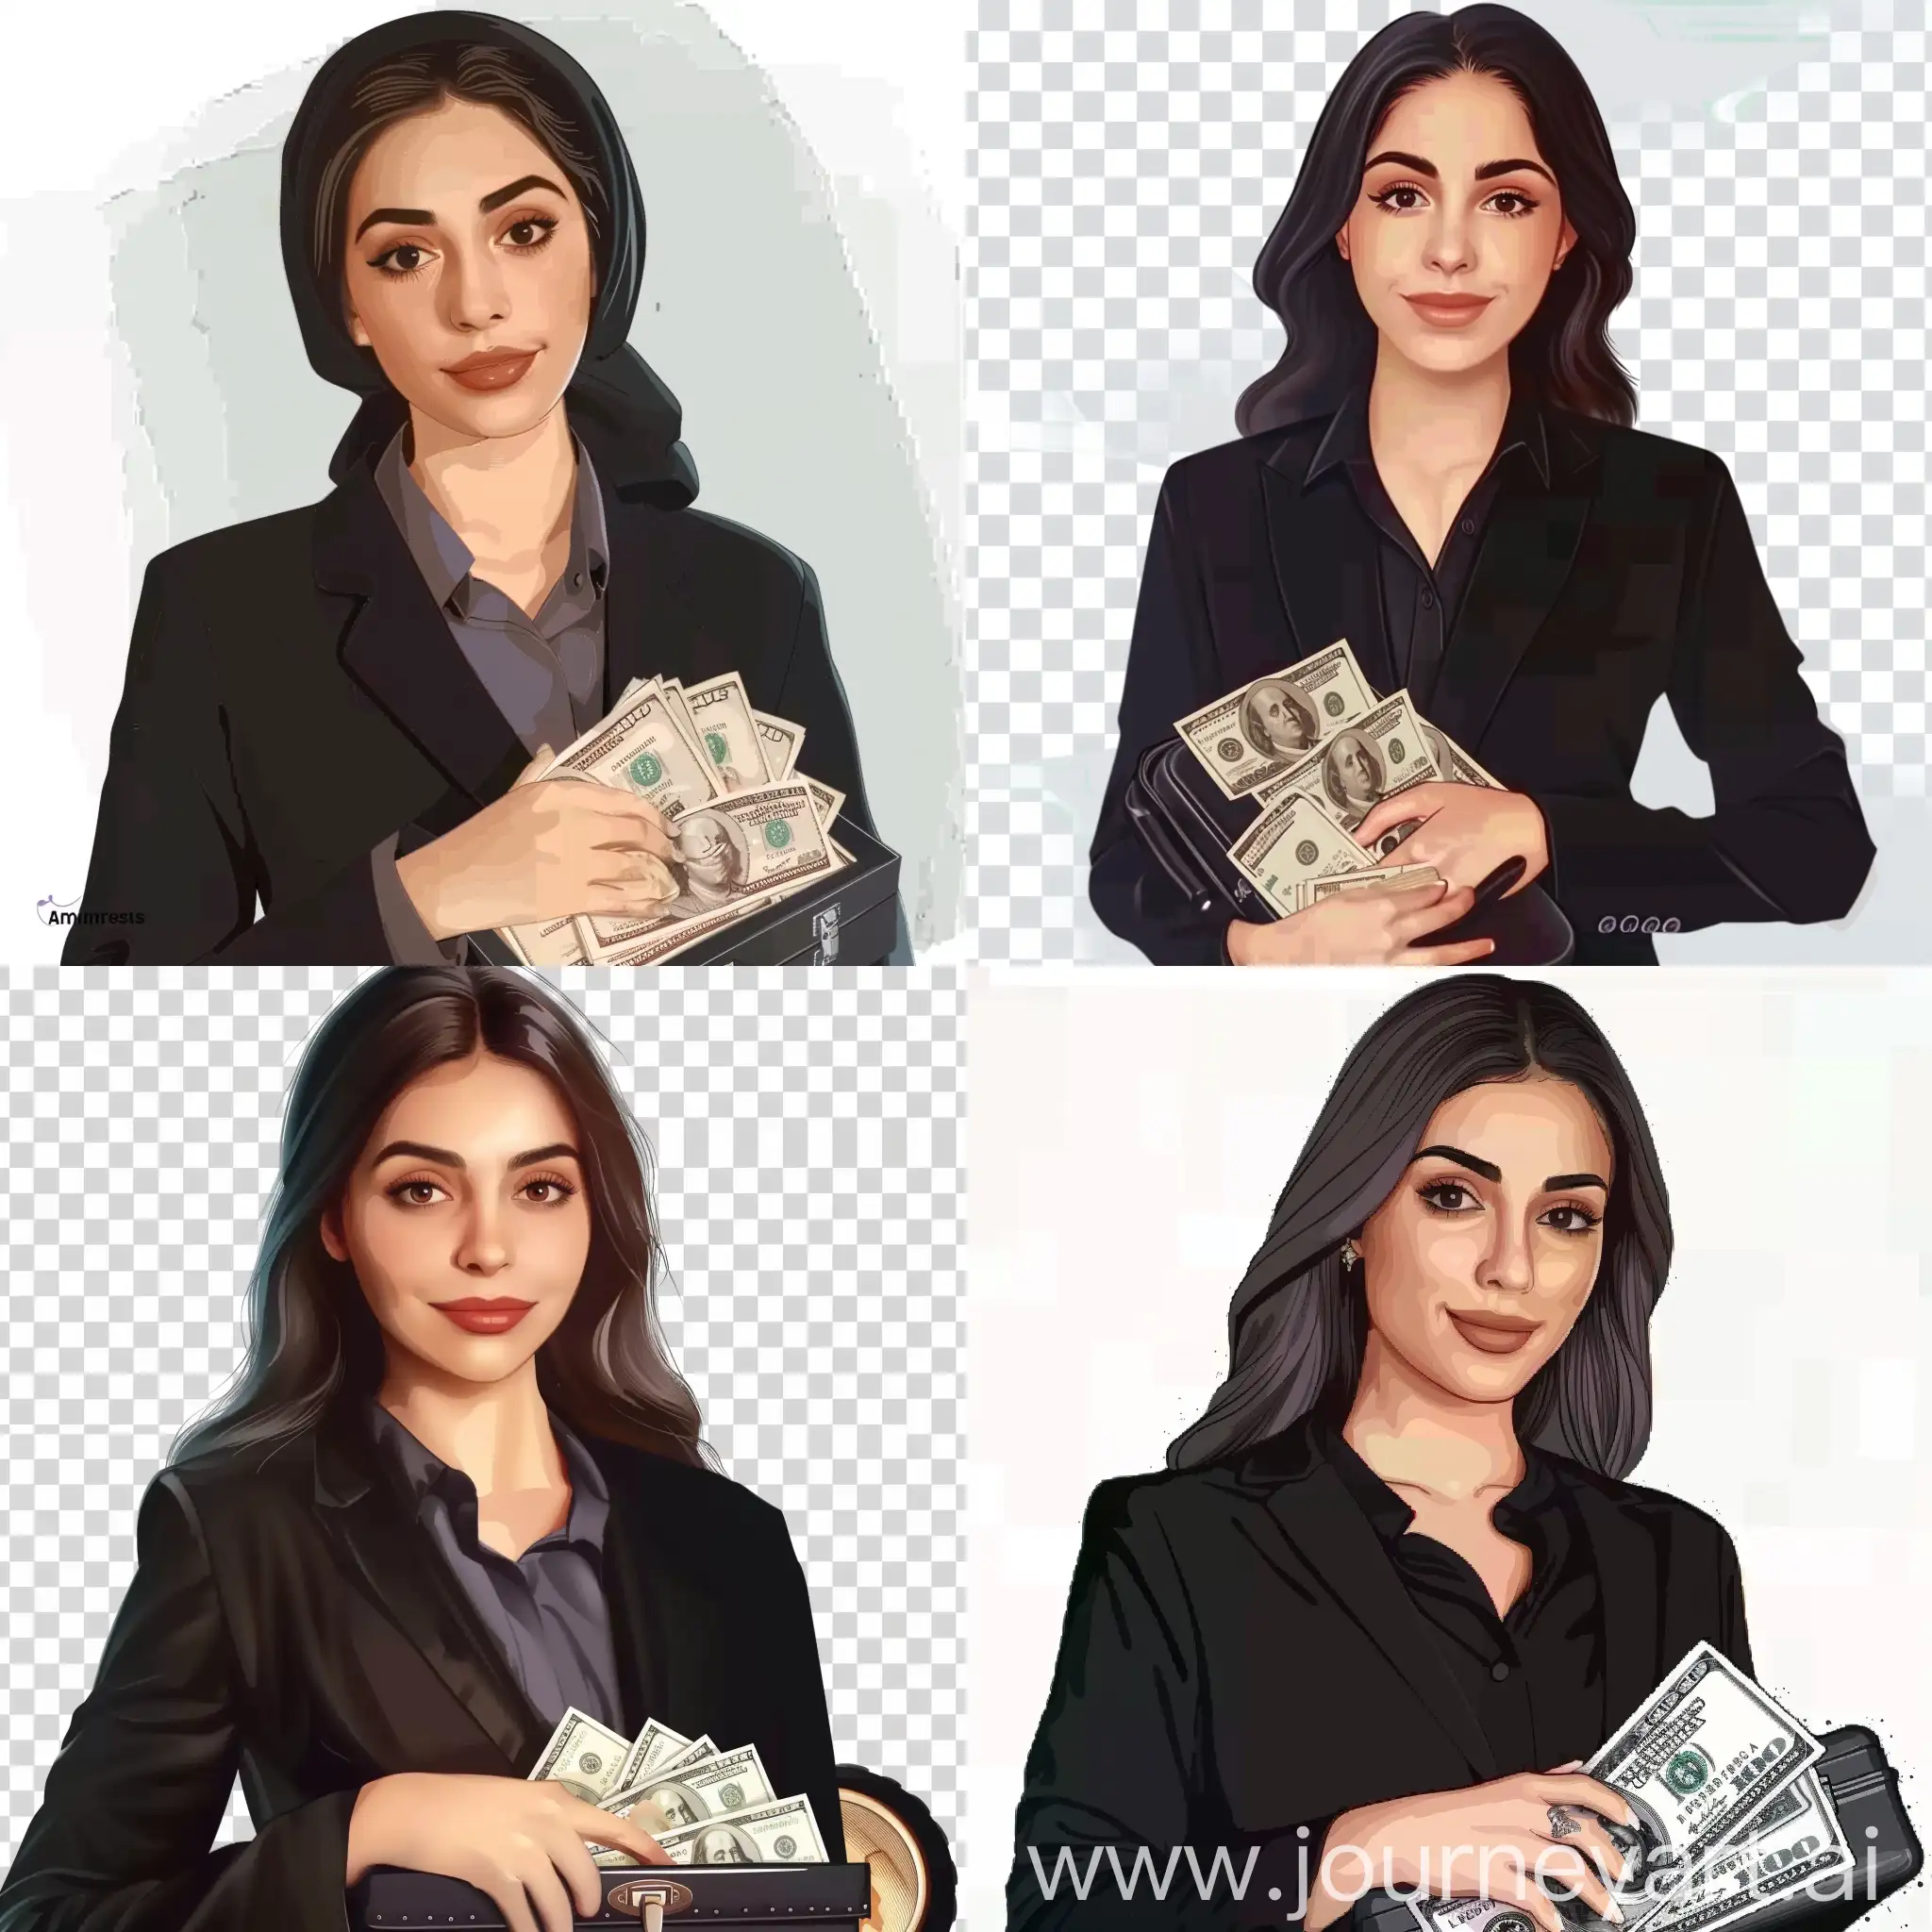 Businesswoman-Showing-Briefcase-Full-of-Dollars